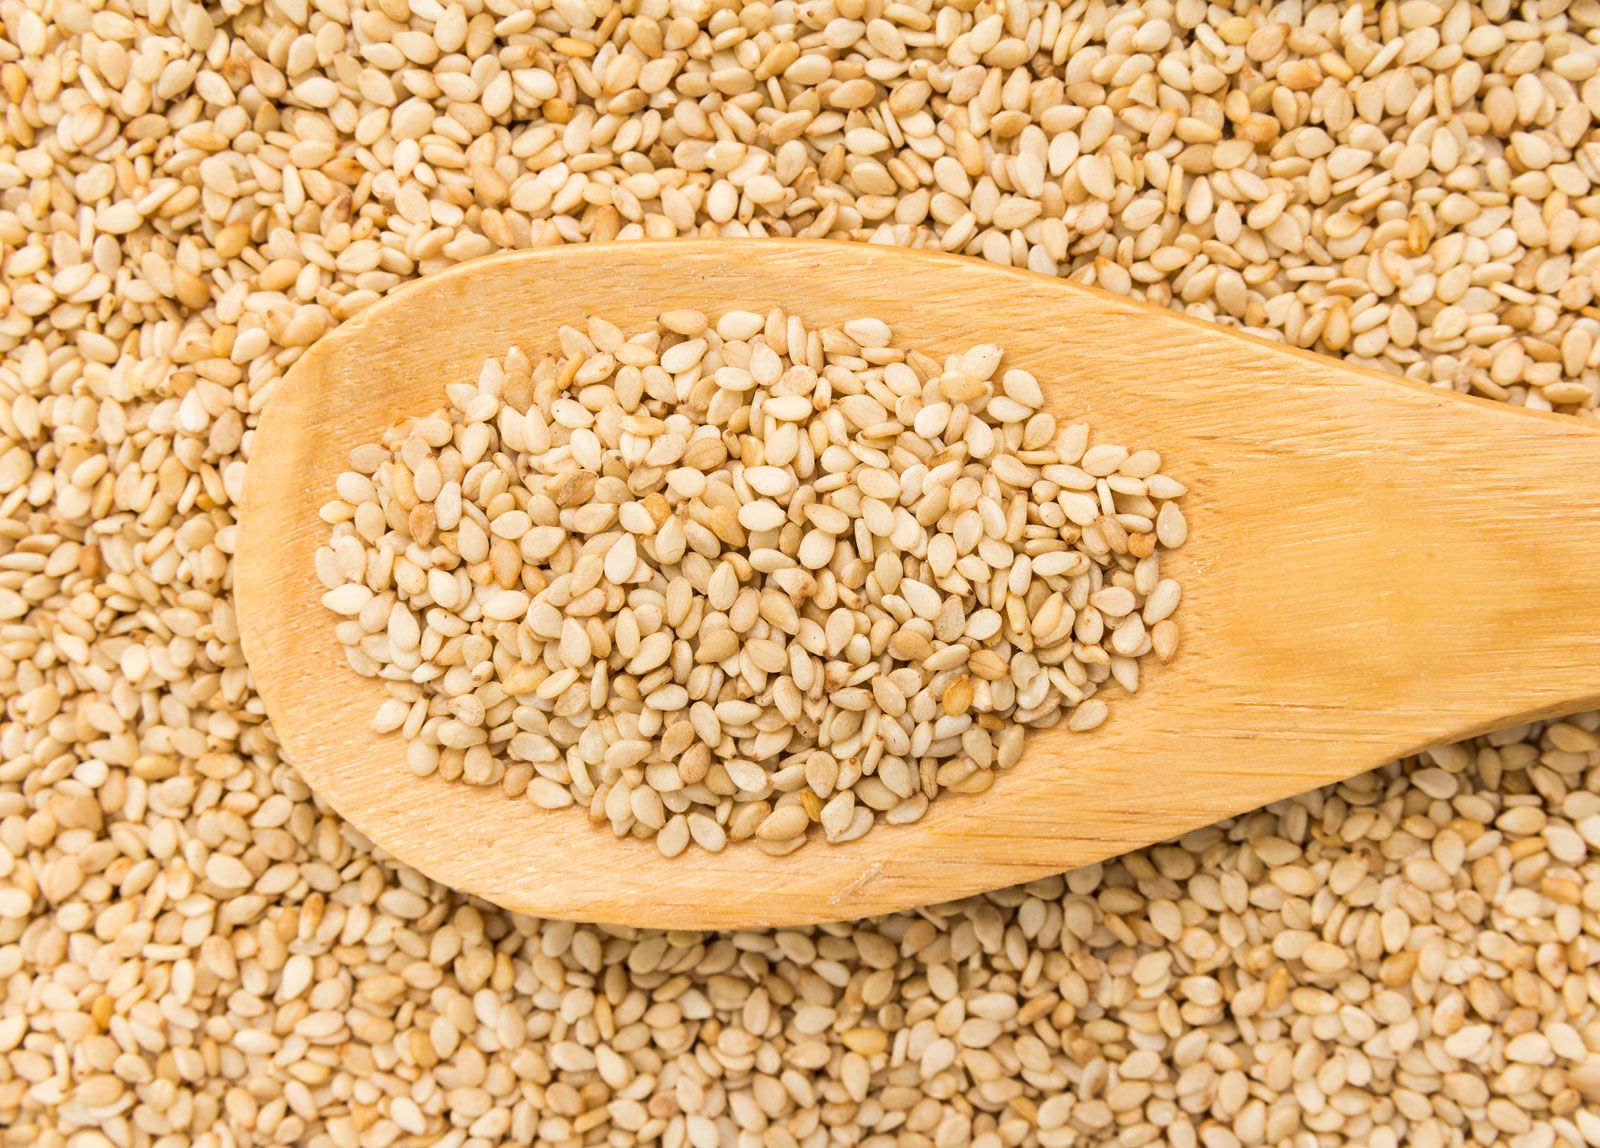 Last year, for the first time, the Bolivian departments of Cochabamba, Tarija, and Chuquisaca recorded sesame exports. The region of Santa Cruz was the largest trader of this food to the international market.